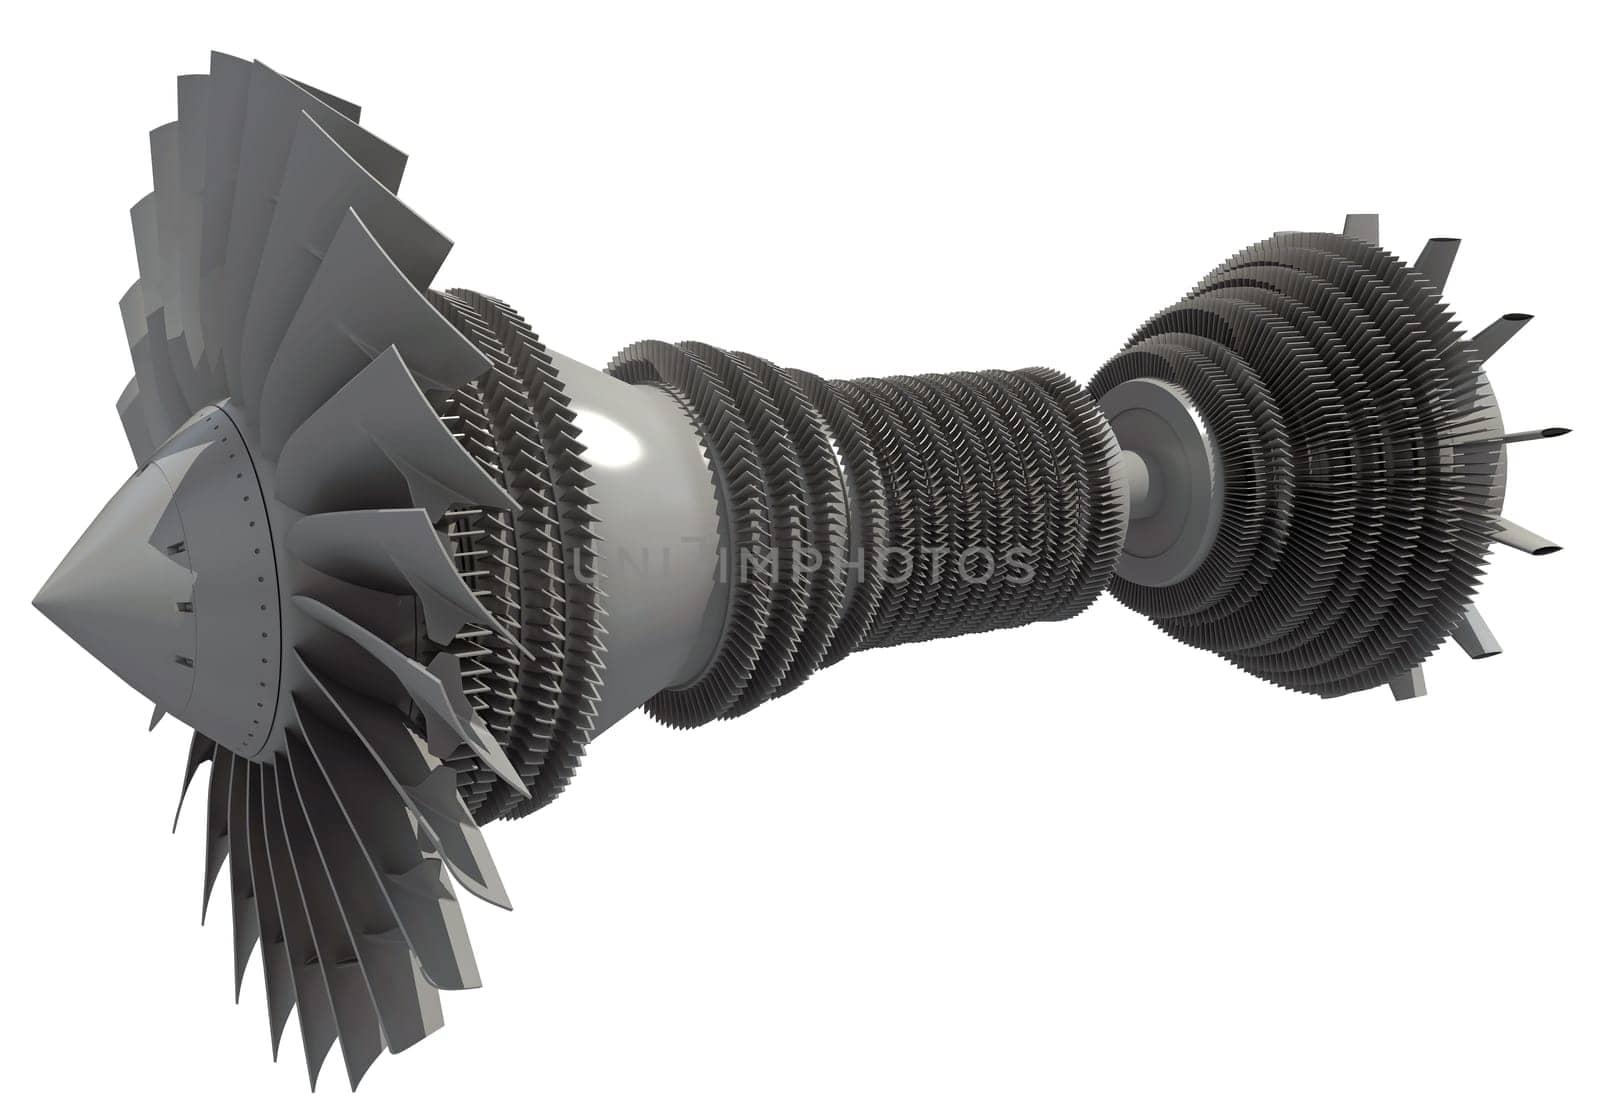 Aircraft Turbine Engine 3D rendering model on white background